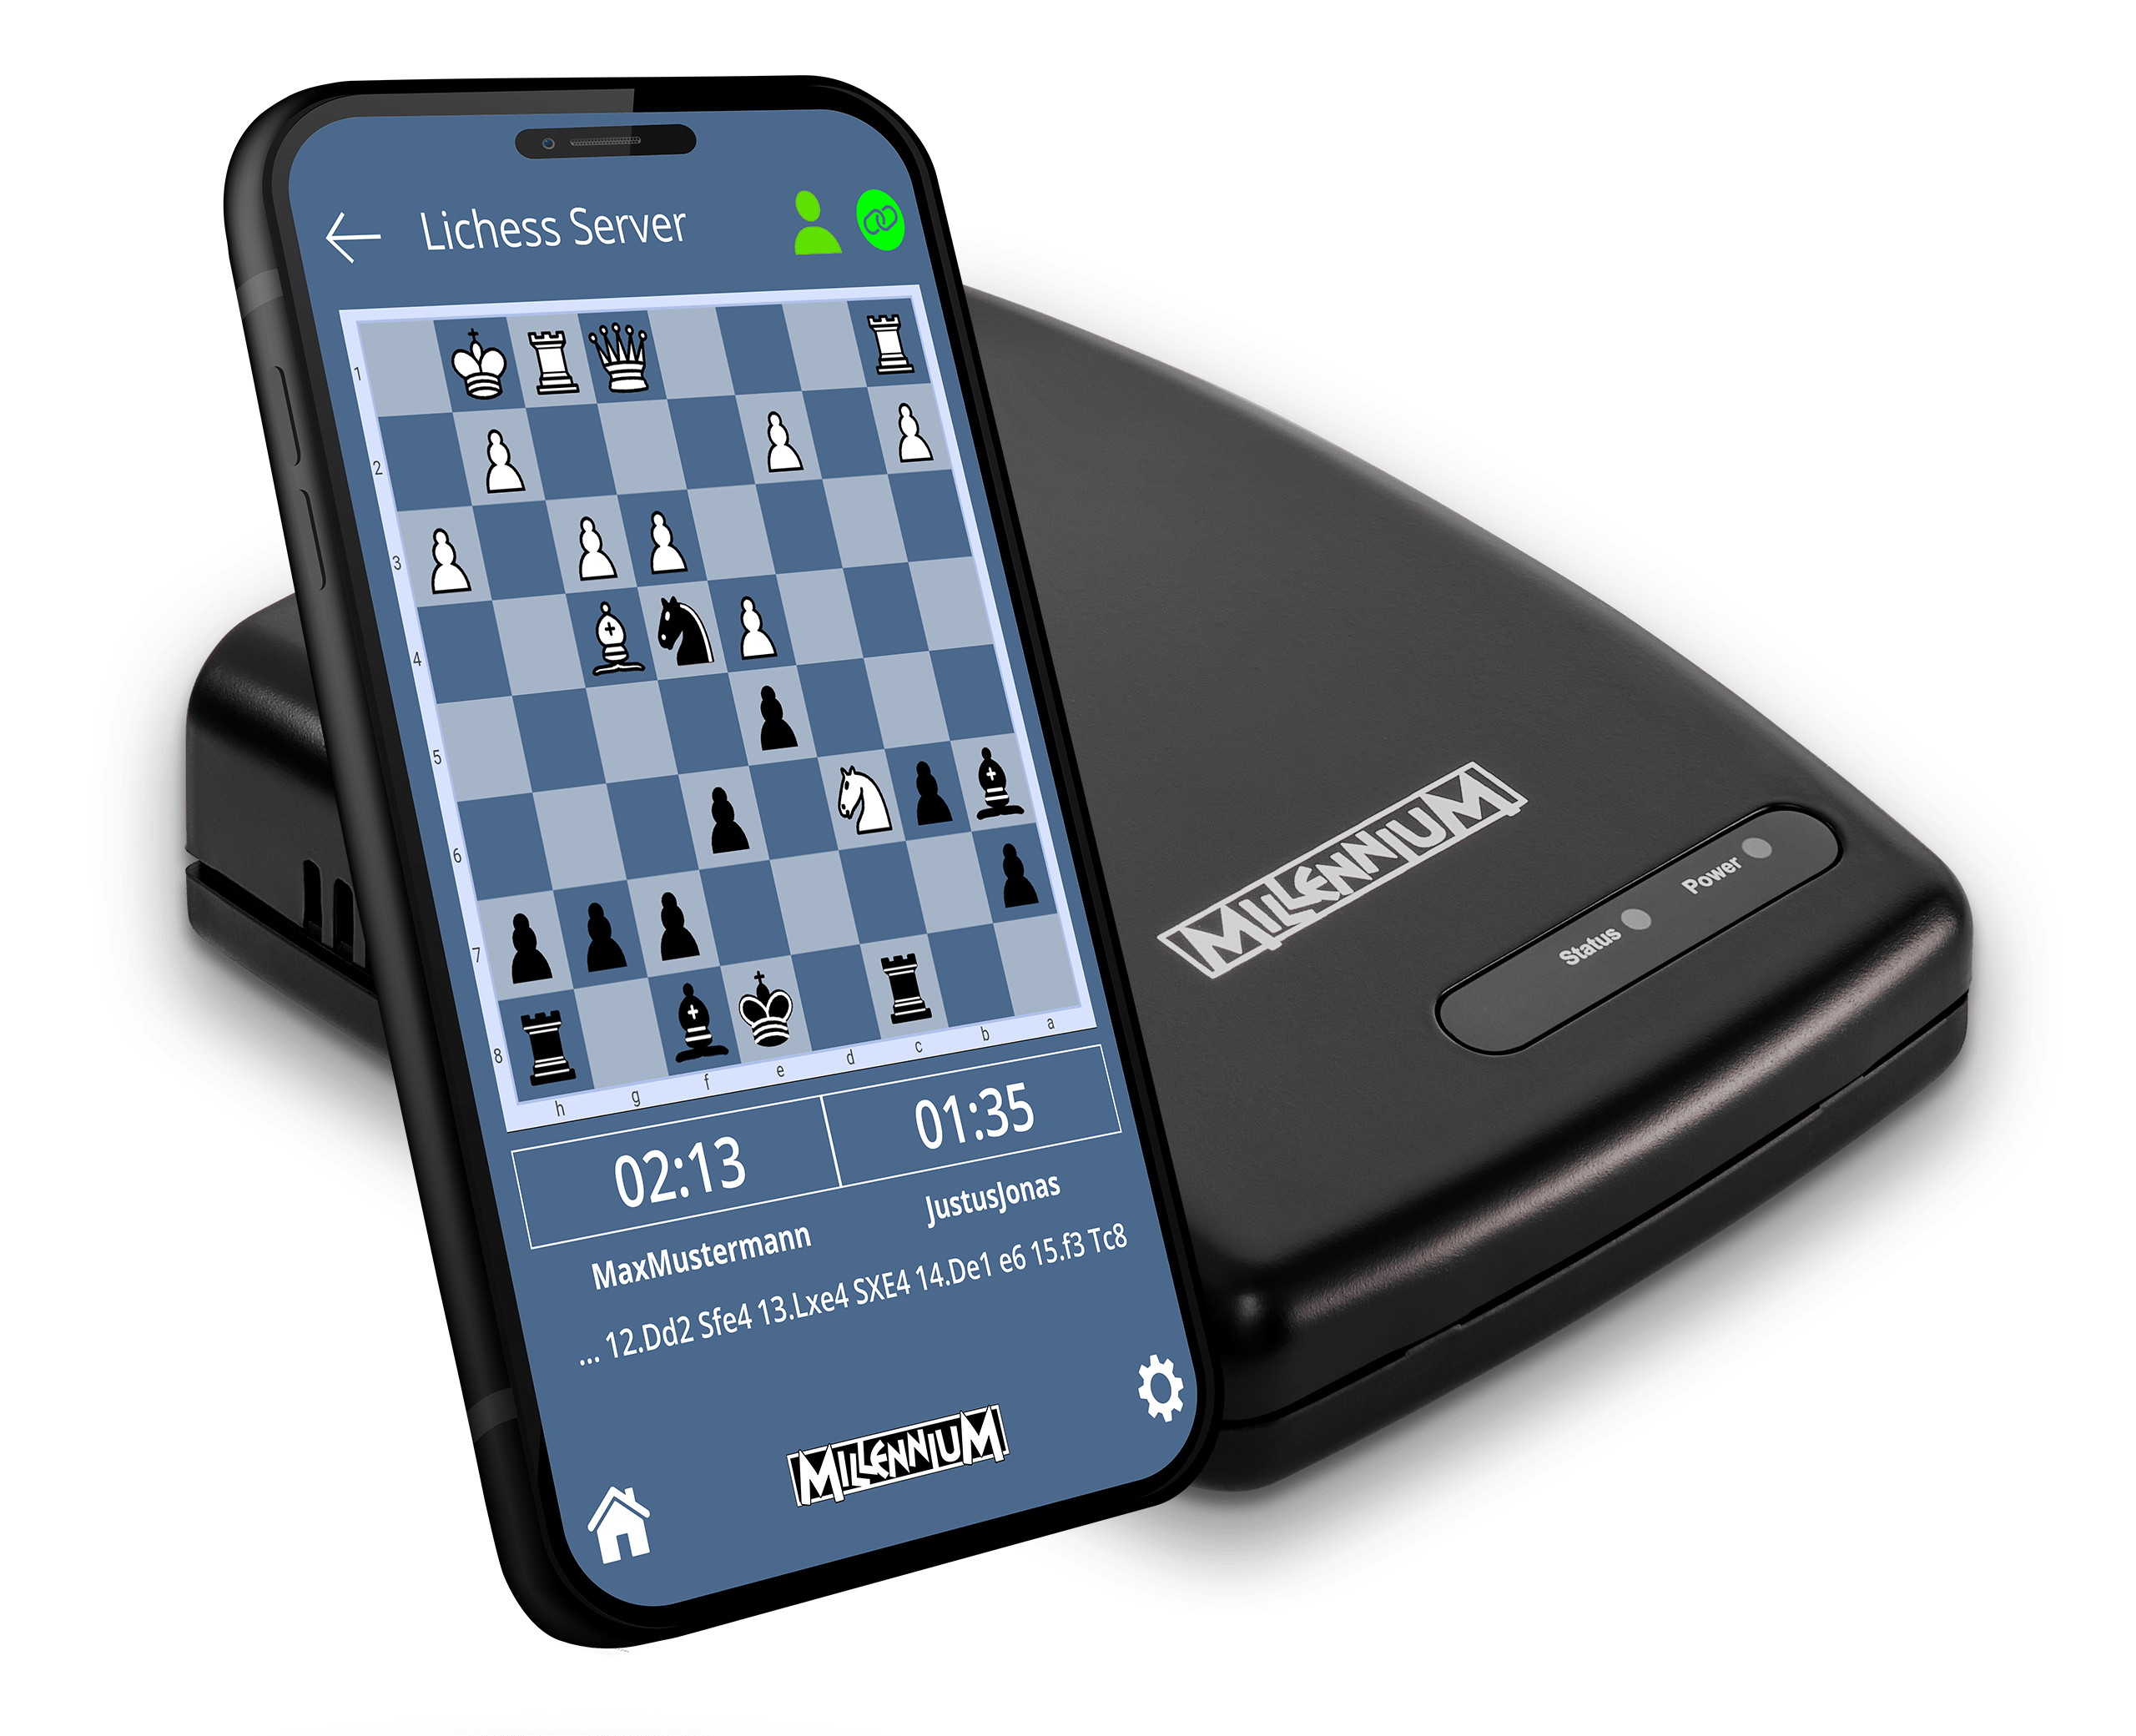 Millennium Chess Computer Exclusive - Luxe Edition - Chess Computer - Chess-House